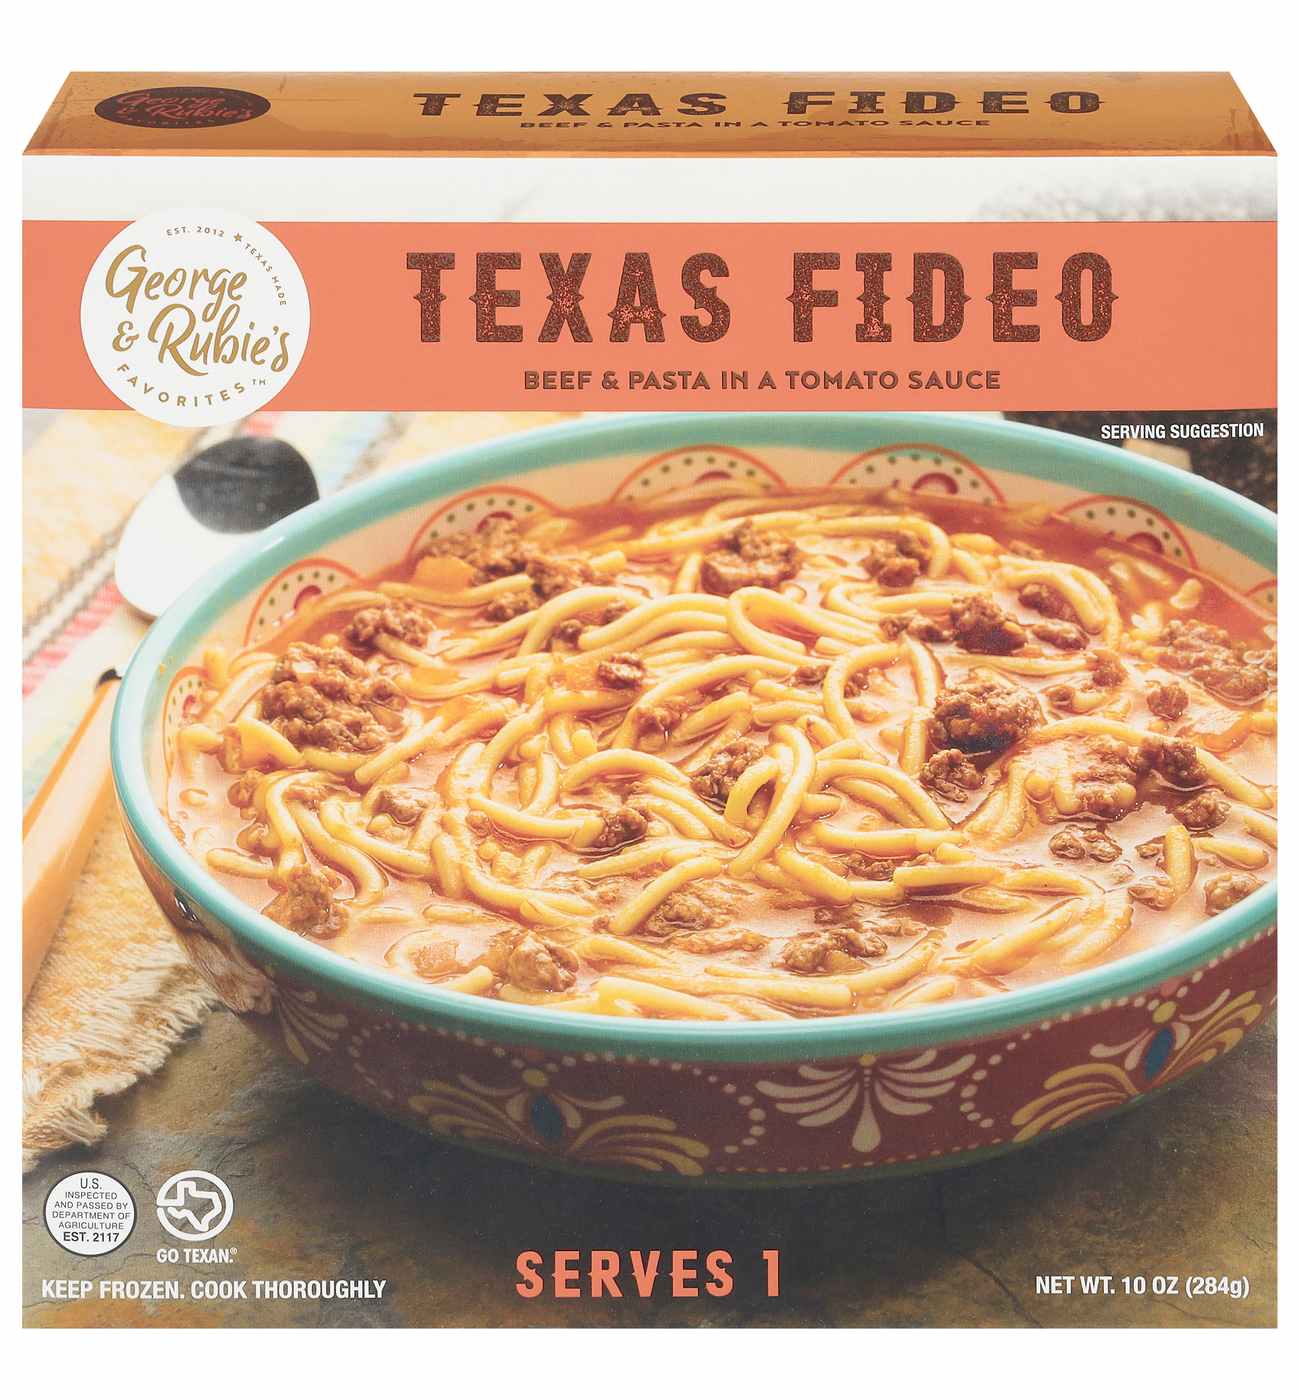 George & Rubie's Favorites Texas Fideo Frozen Meal; image 1 of 2